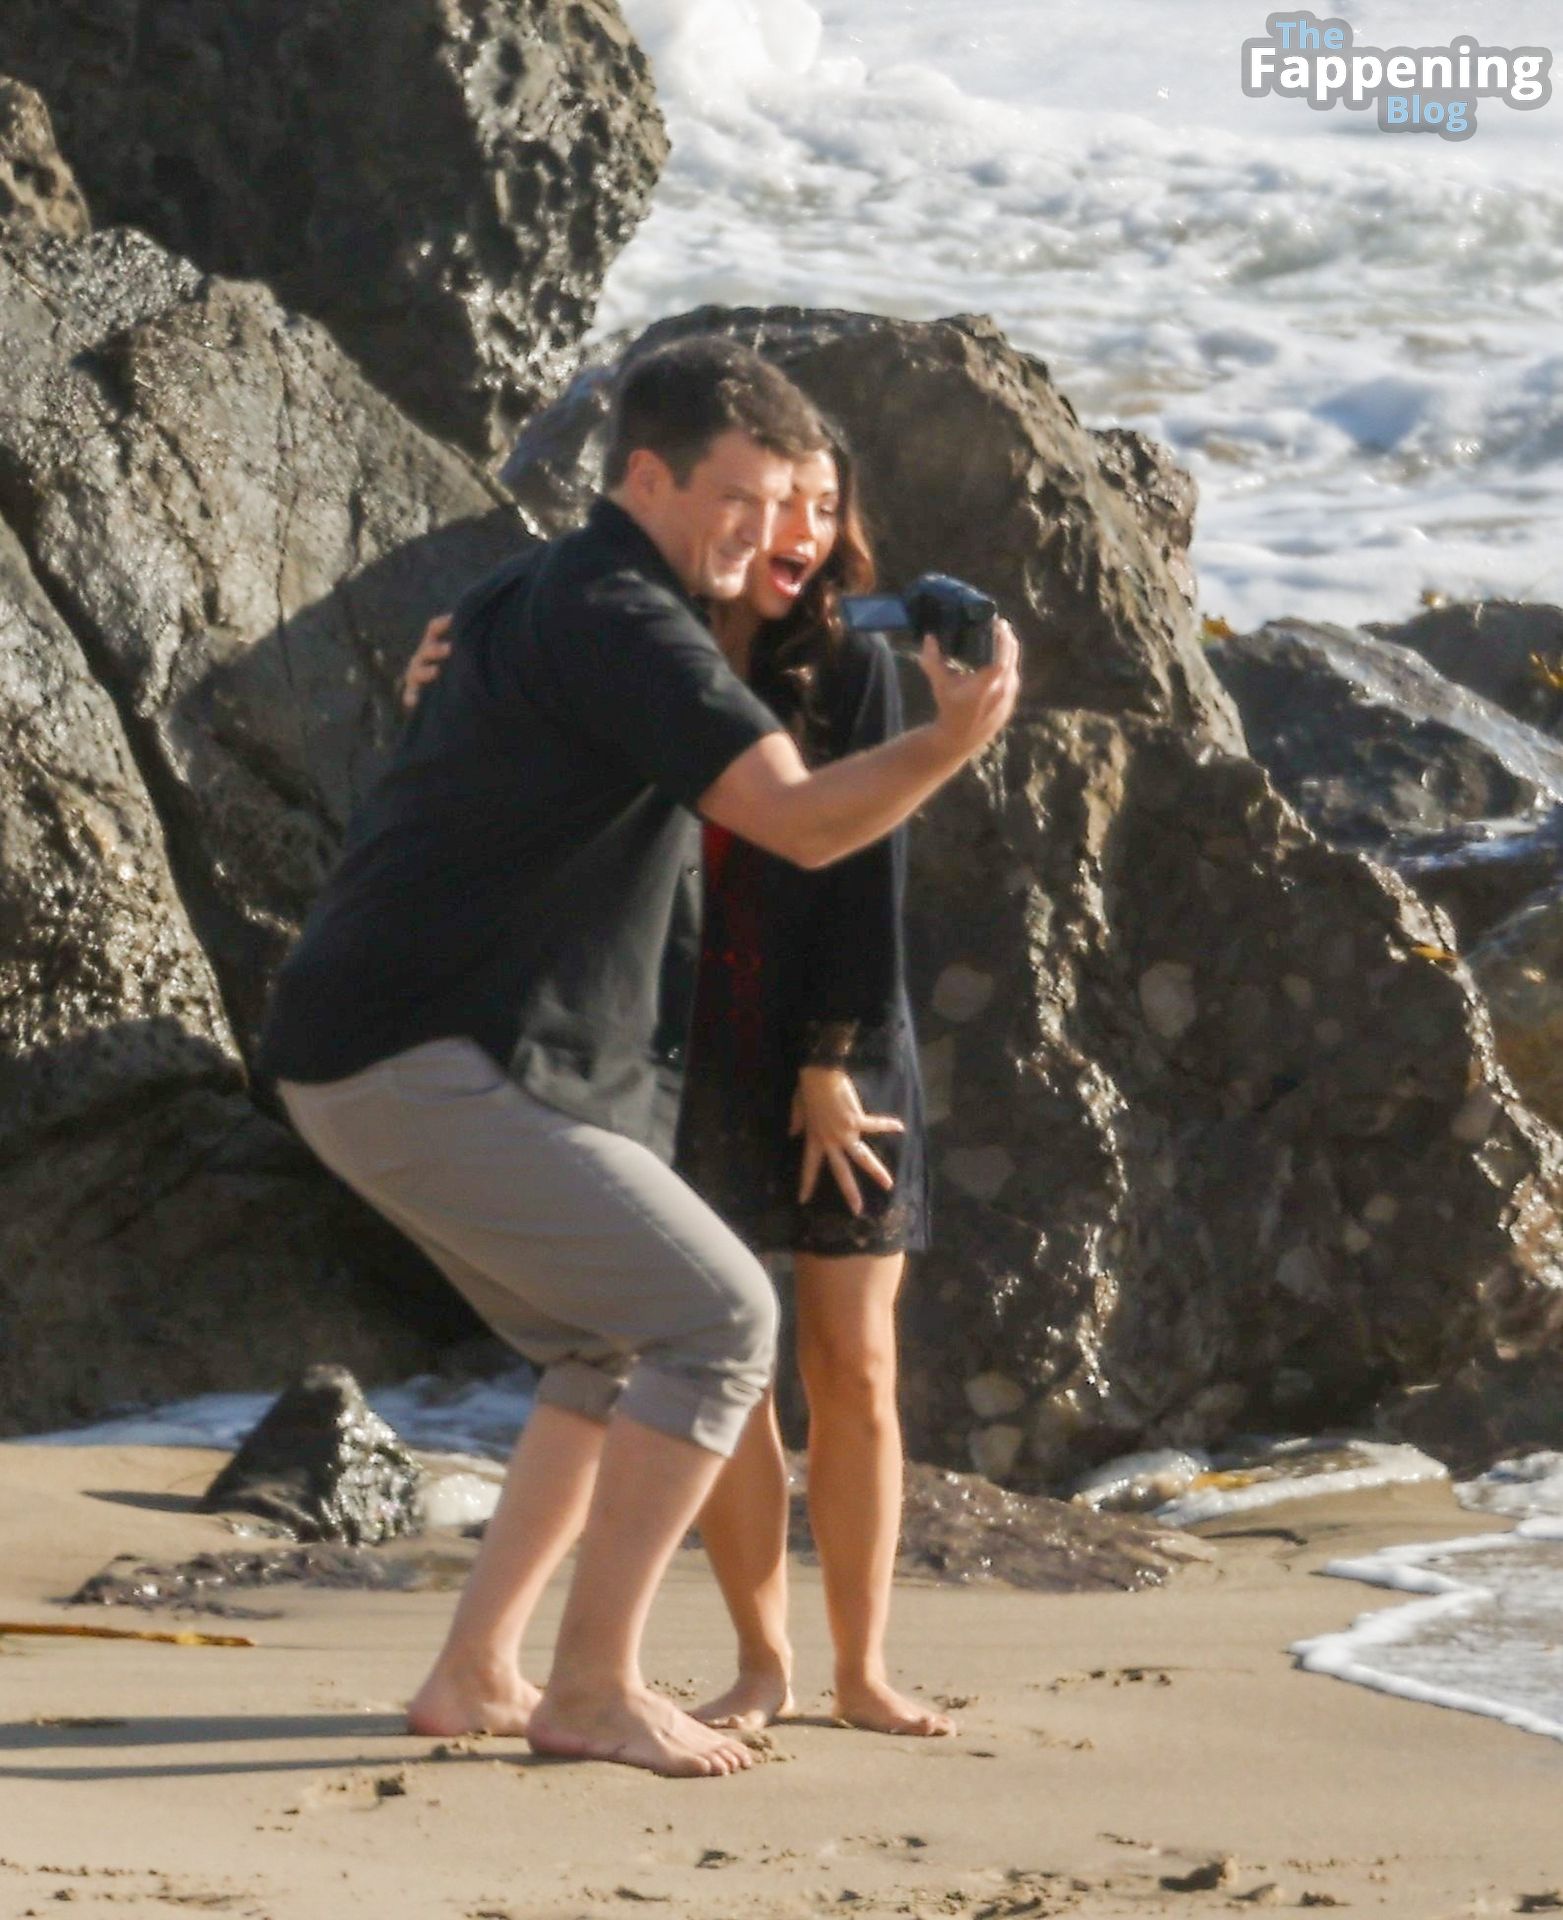 Jenna Dewan Plays a Pregnant Woman in Scenes for “The Rookie” with Nathan Fillion in Malibu (172 Photos)